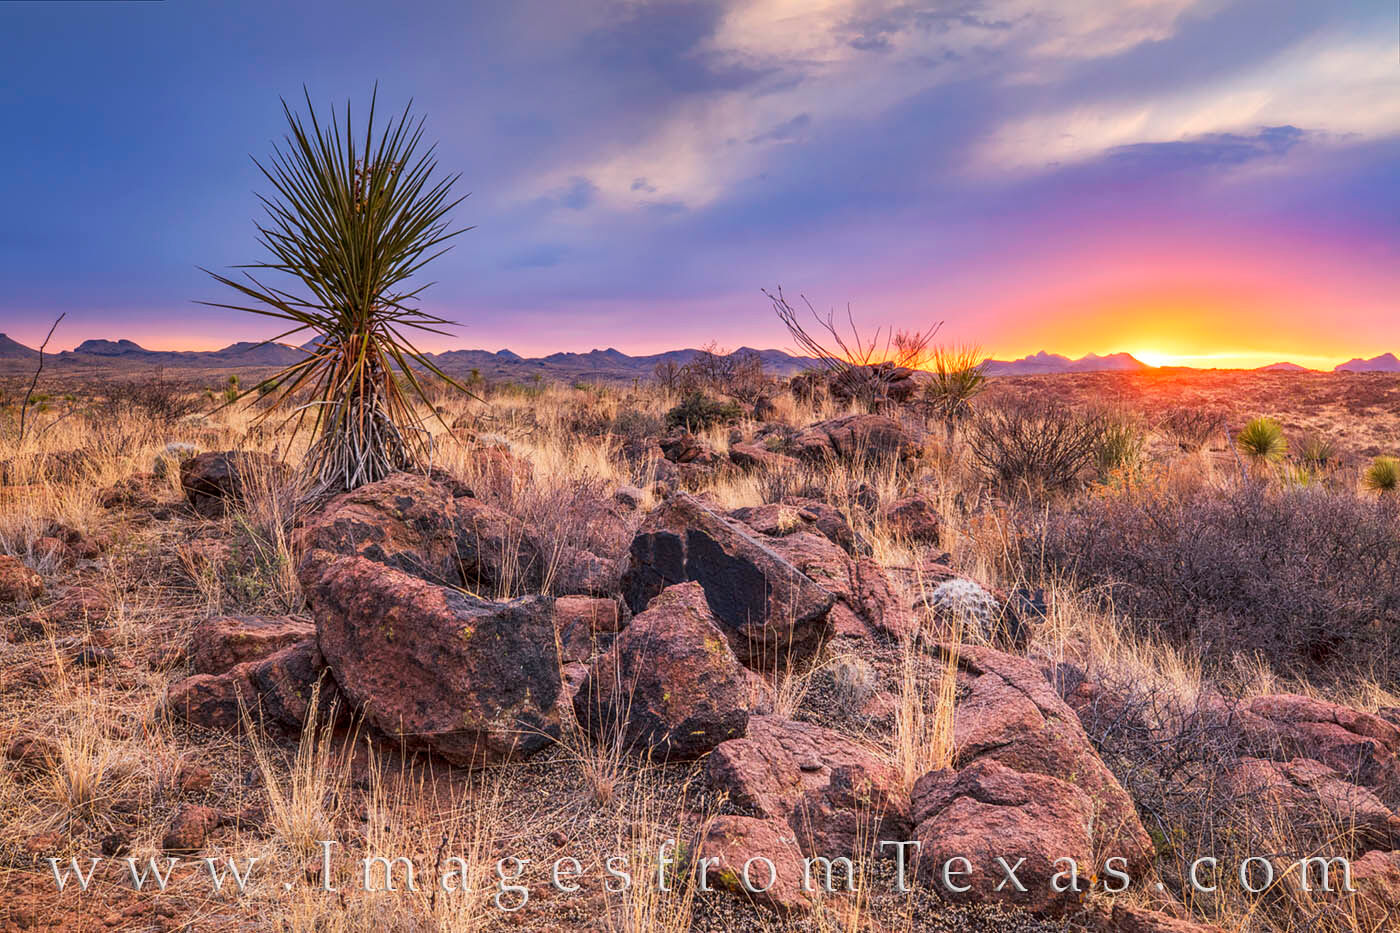 Sunset comes to the Chihuahuan Desert in Big Bend Ranch State Park on a warm spring evening. Here, a yucca stands tall in as...